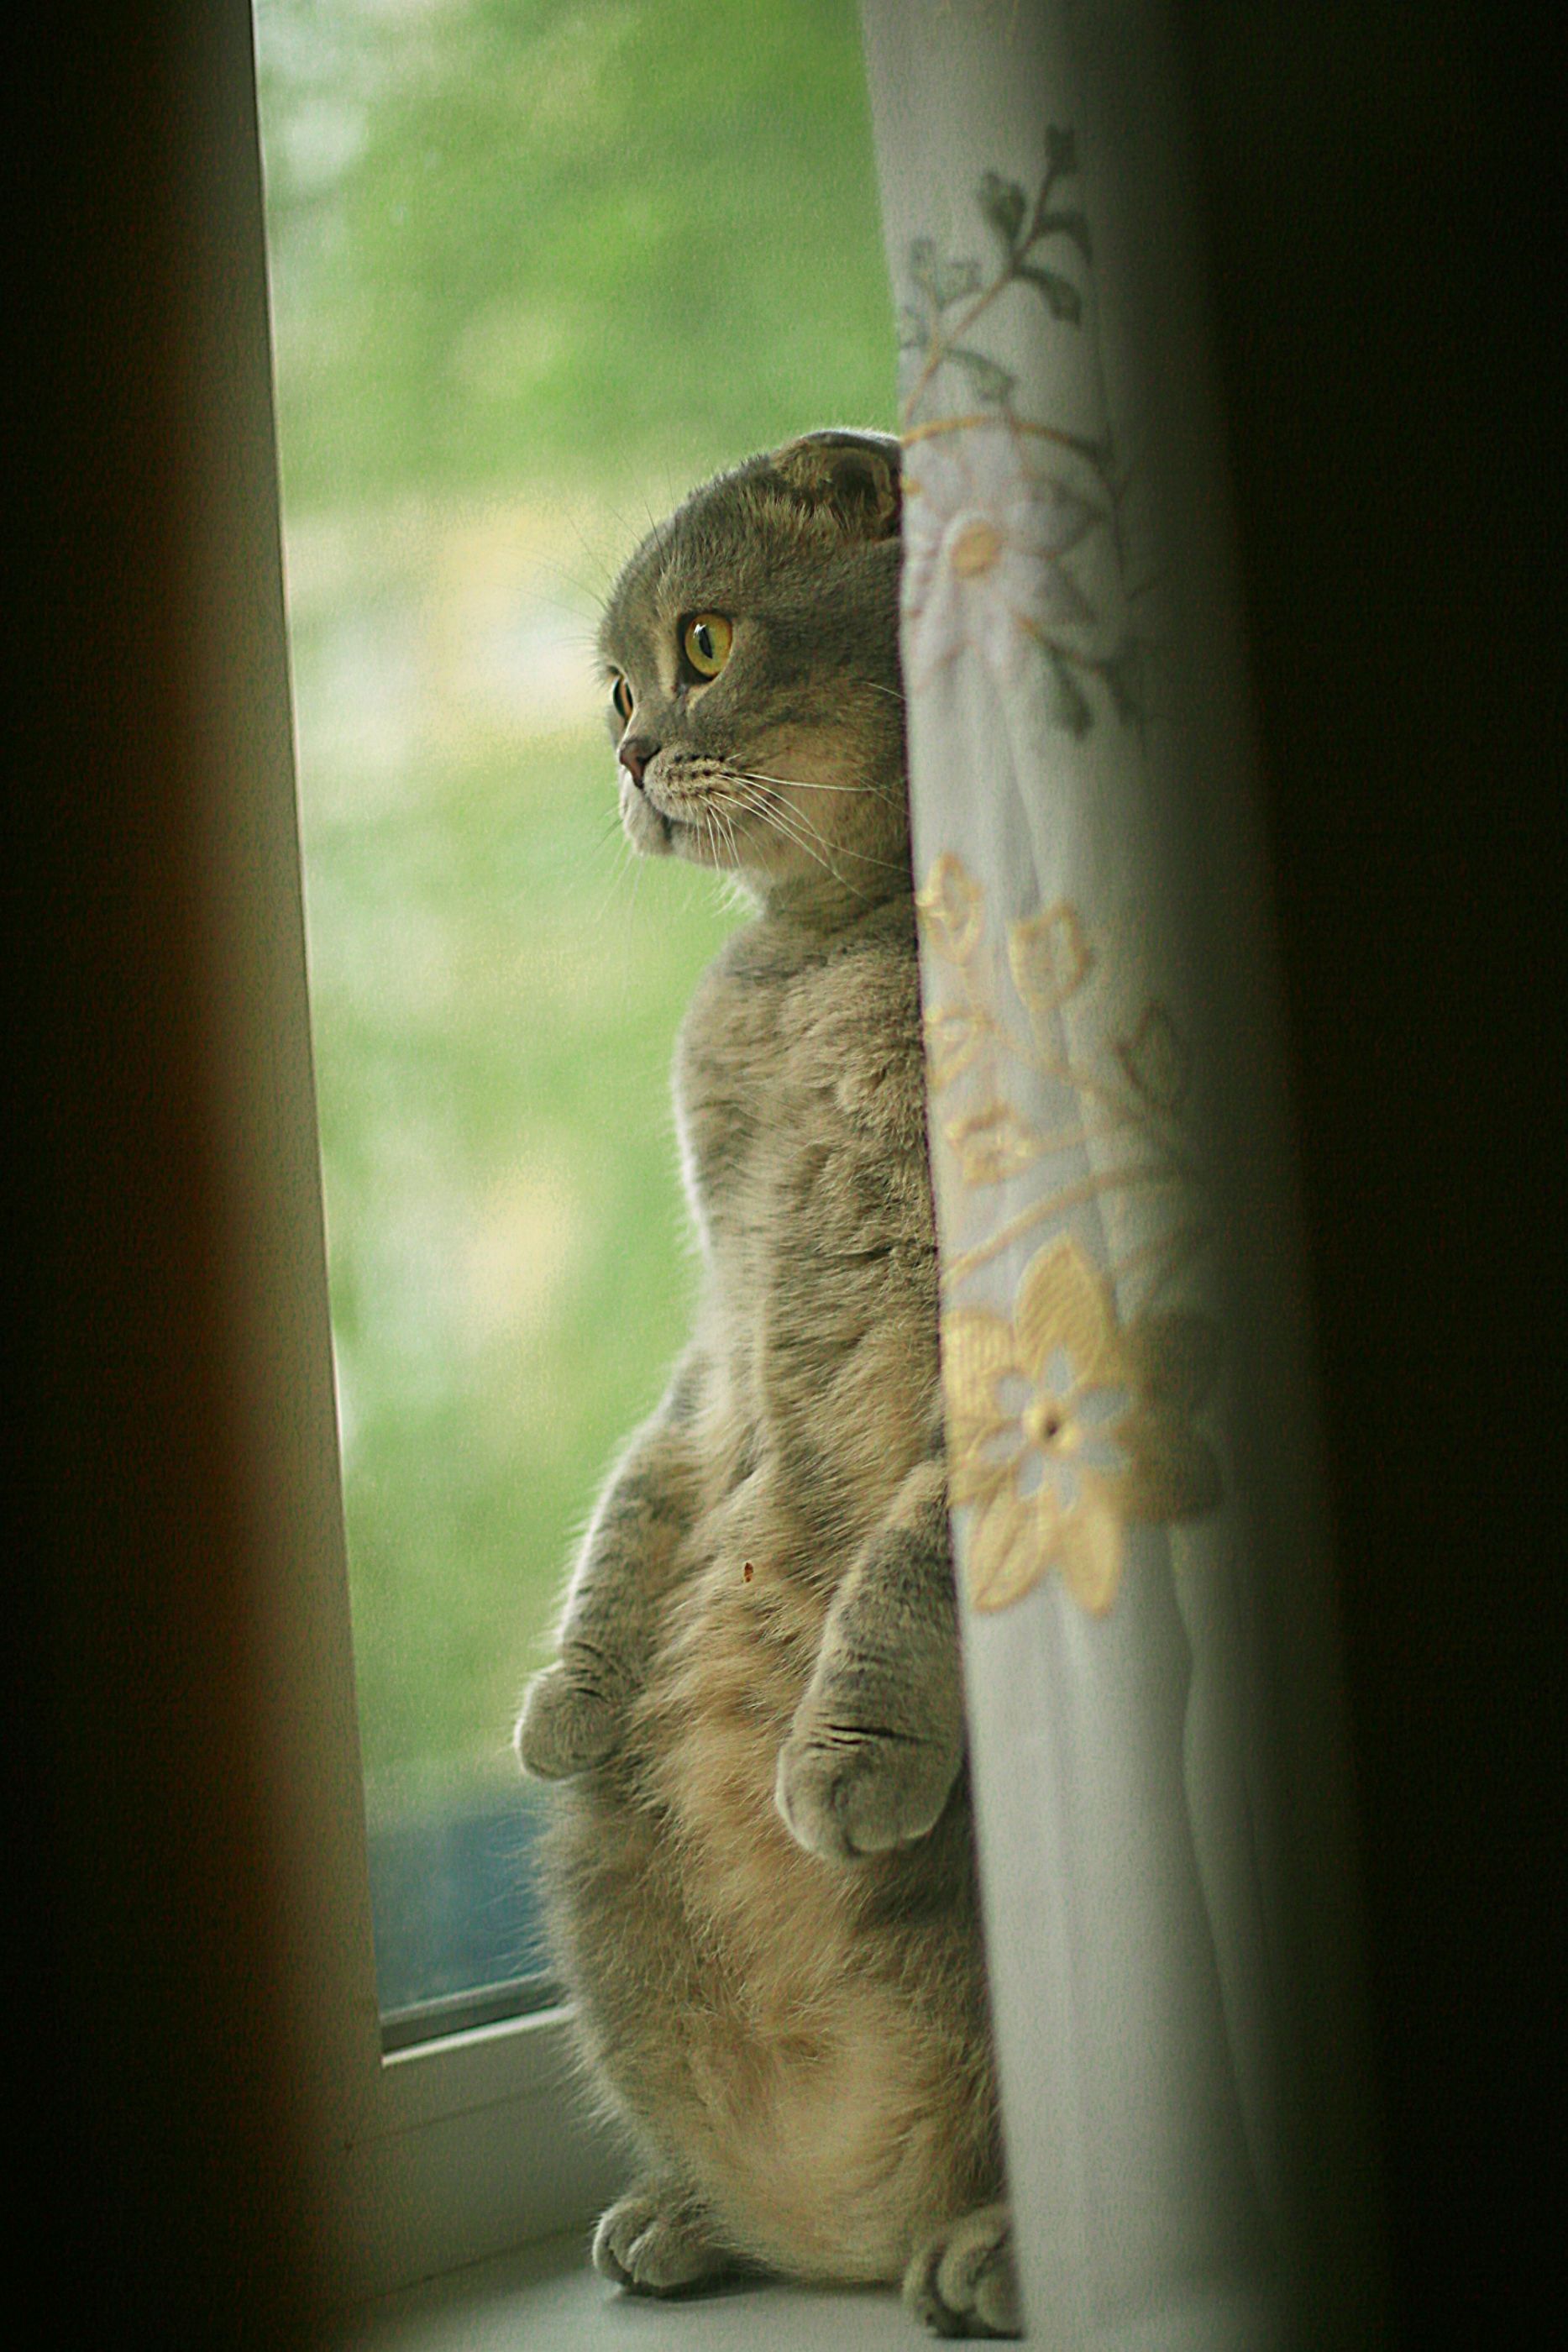 The cat and window